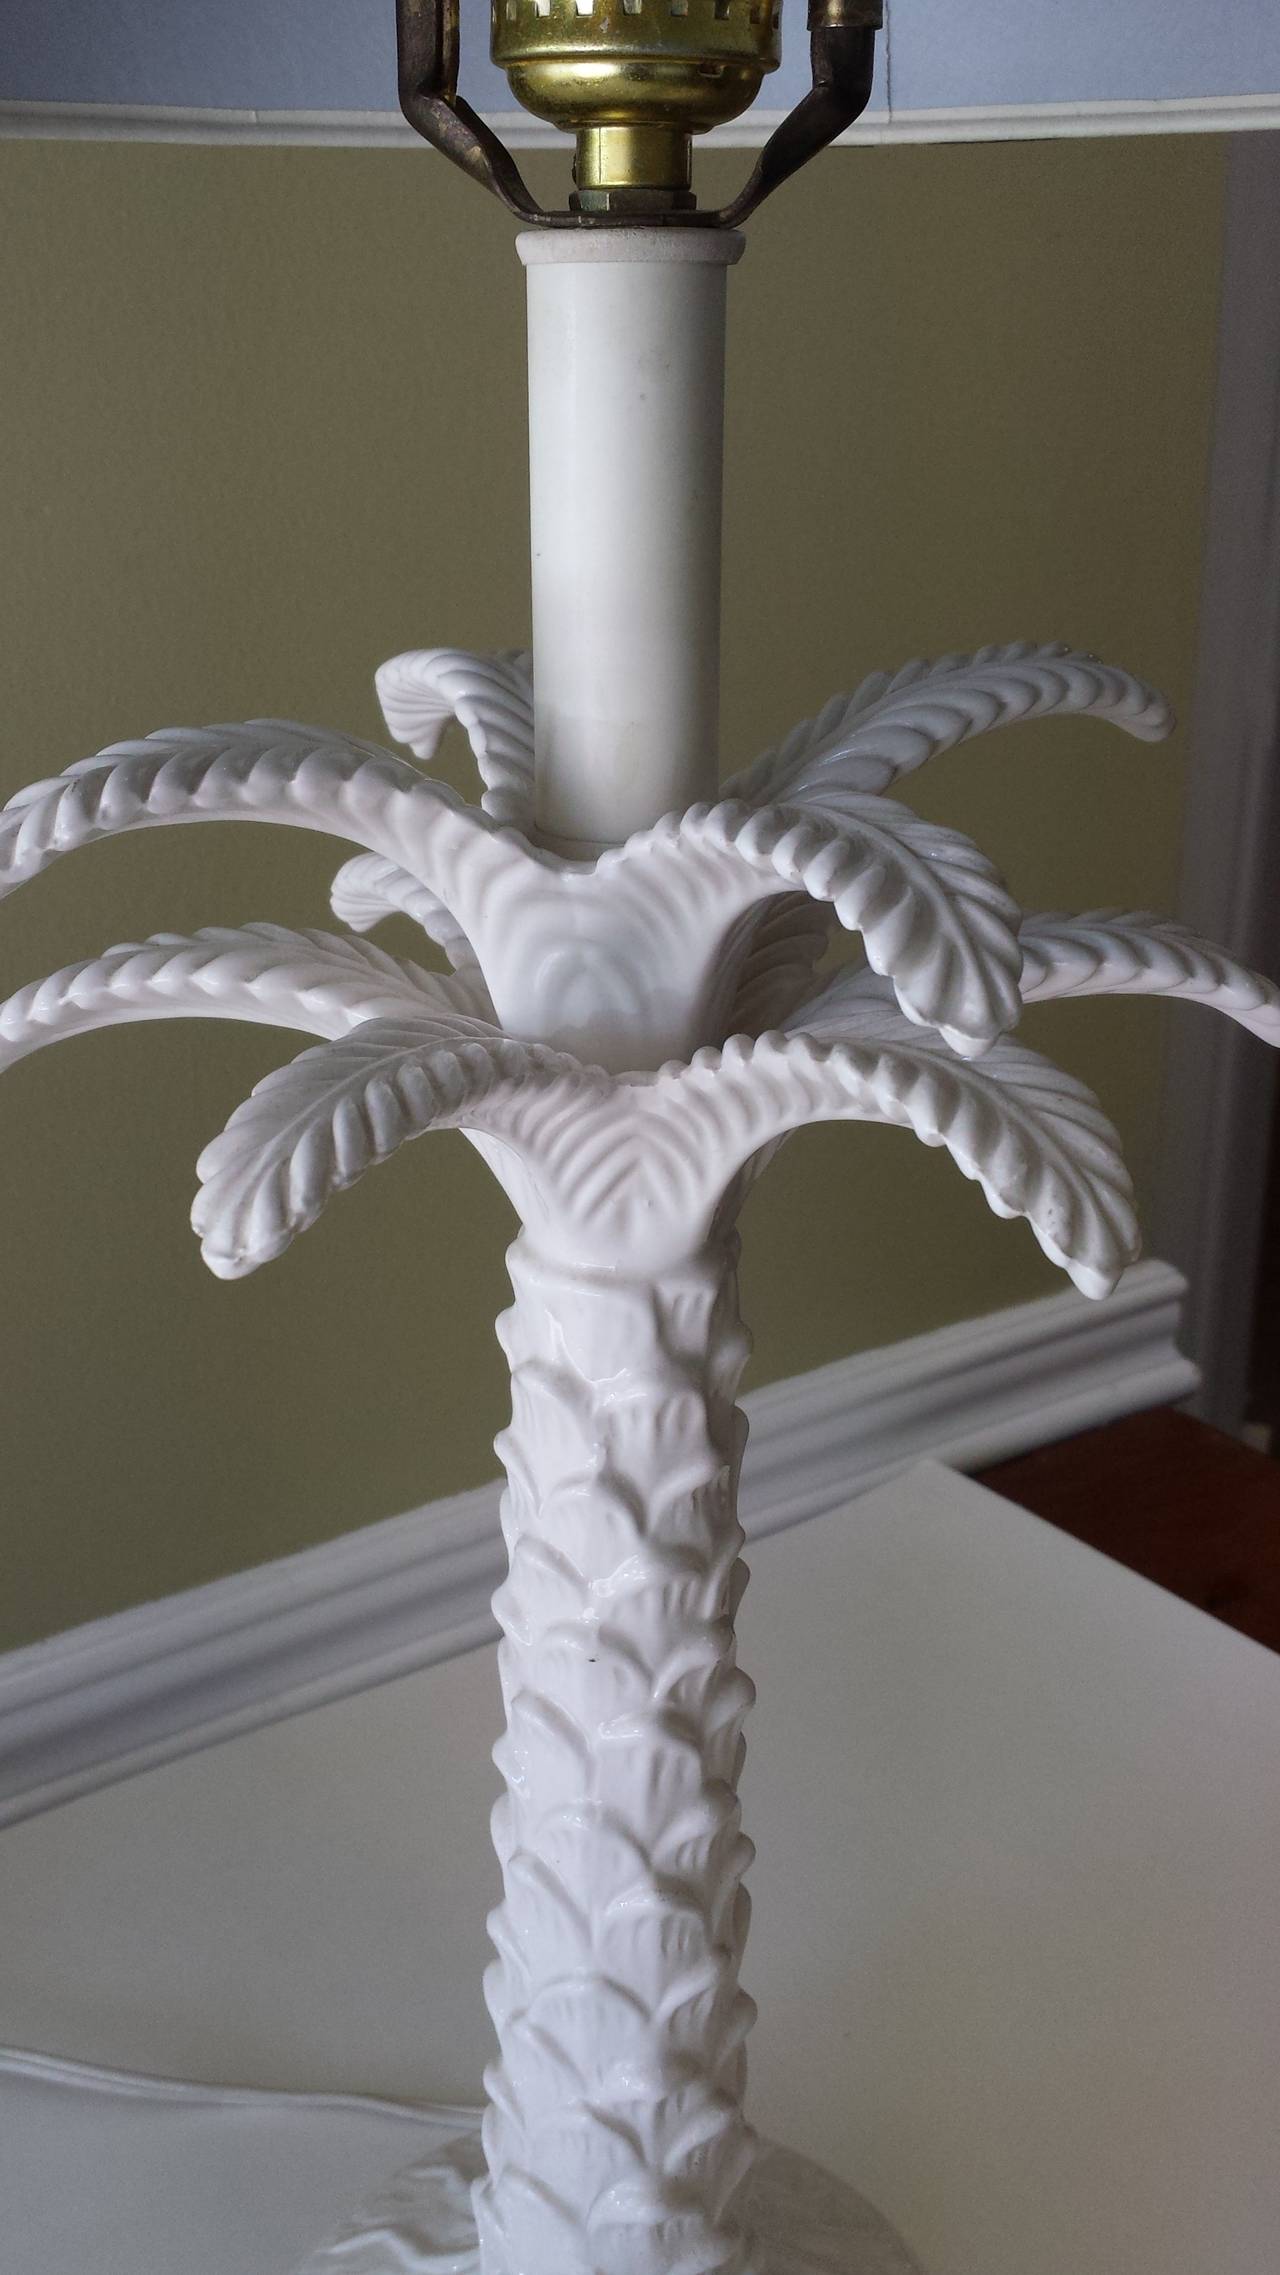 White Porcelain Palm Tree Table Lamp On White Metal Base, There are 2 sets of 4 palm leaves, Bark pattern on the trunk and base. The lamp is 27